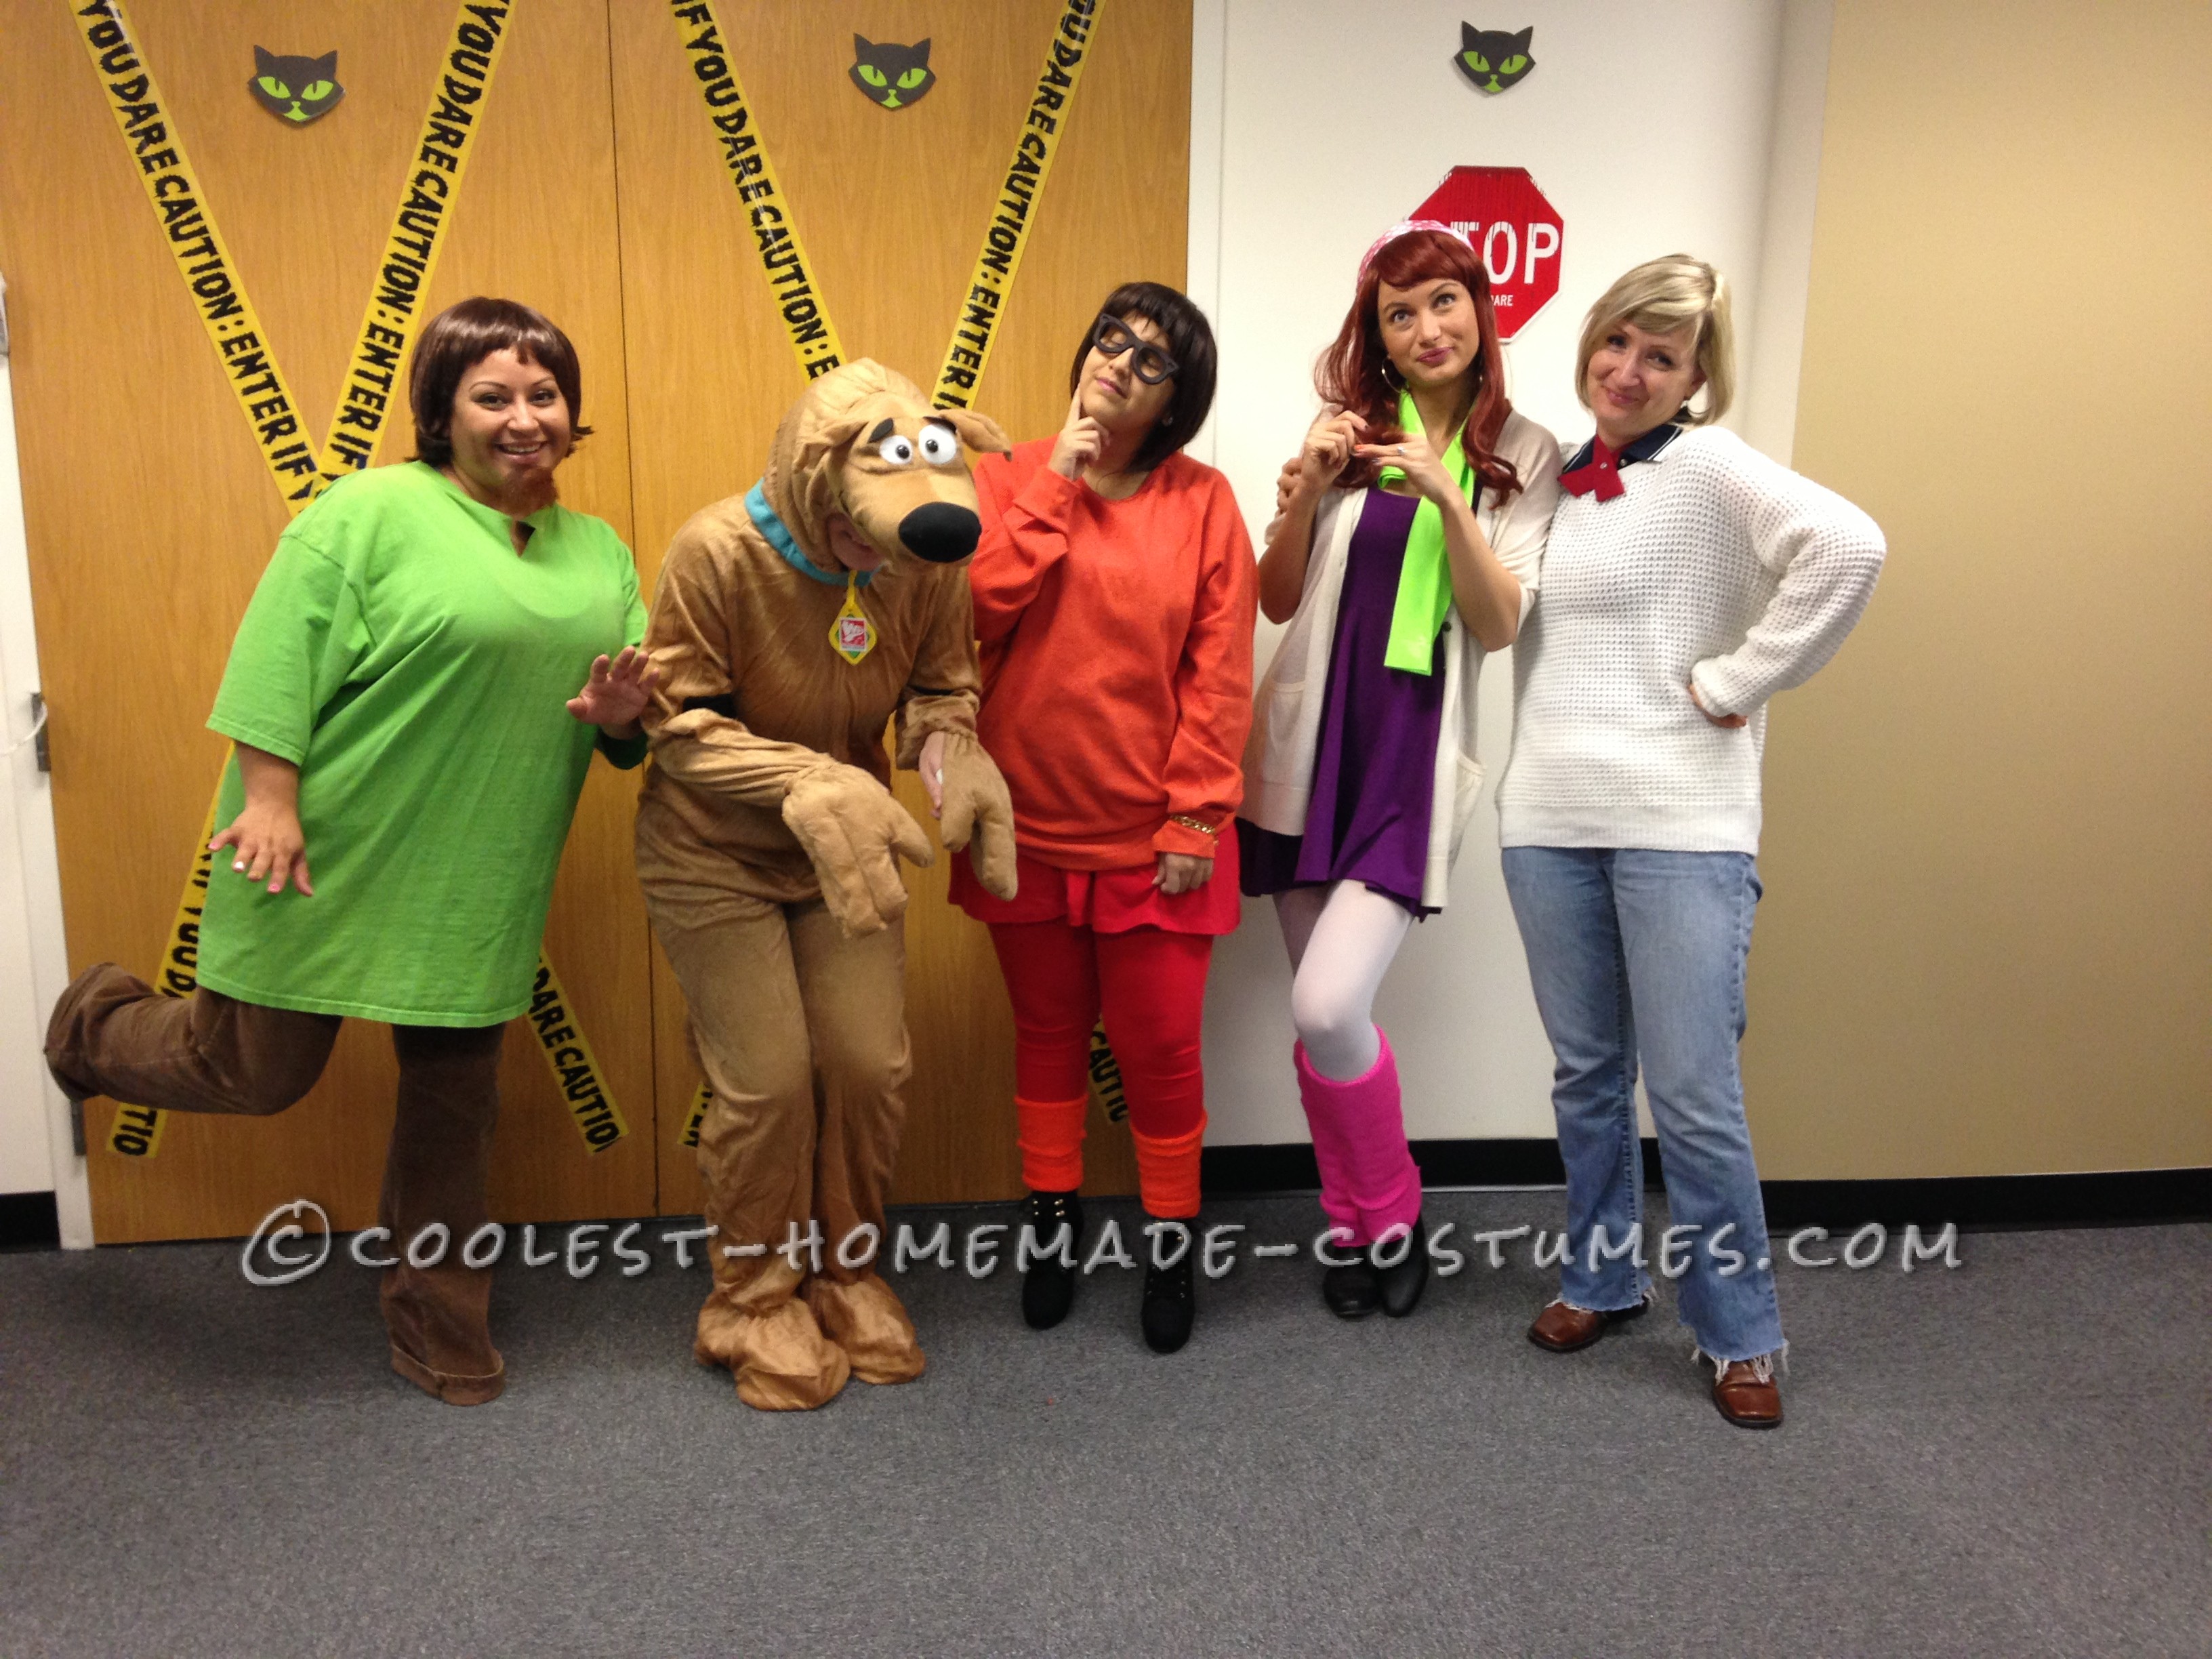 costume for girls - Official Scooby doo halloween costumes Scooby Doo Toddl...